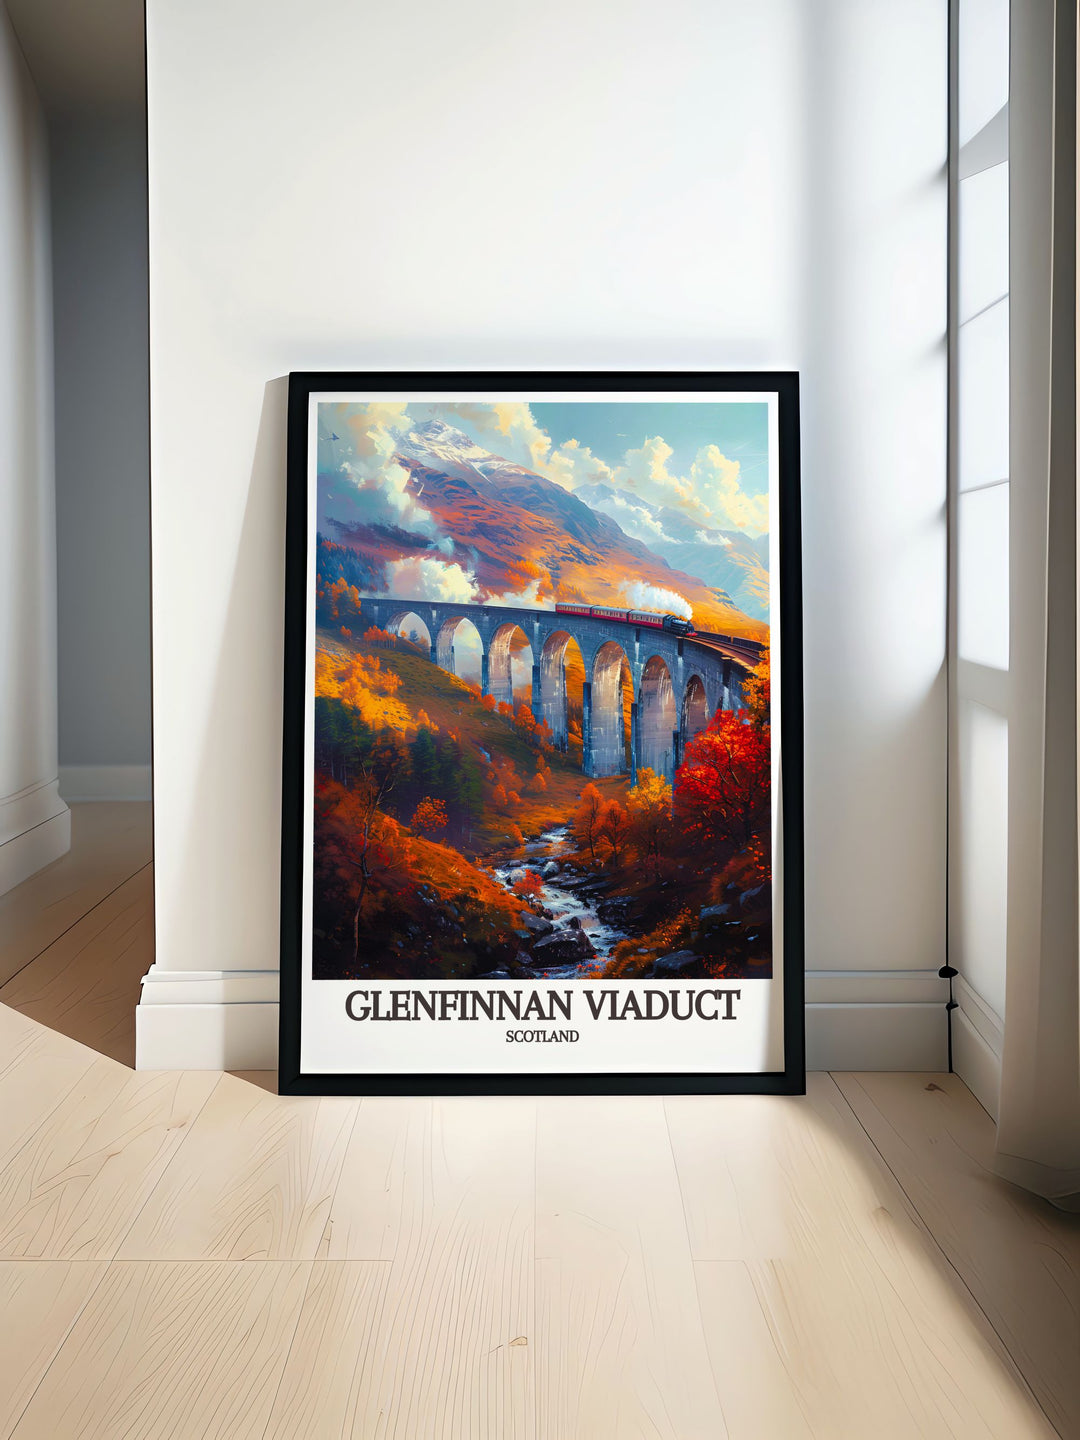 A breathtaking view of the Glenfinnan Viaduct in Scotland, showcasing its 21 arches stretching across the lush landscape of the Scottish Highlands, ideal for adding a historic and scenic touch to your decor.